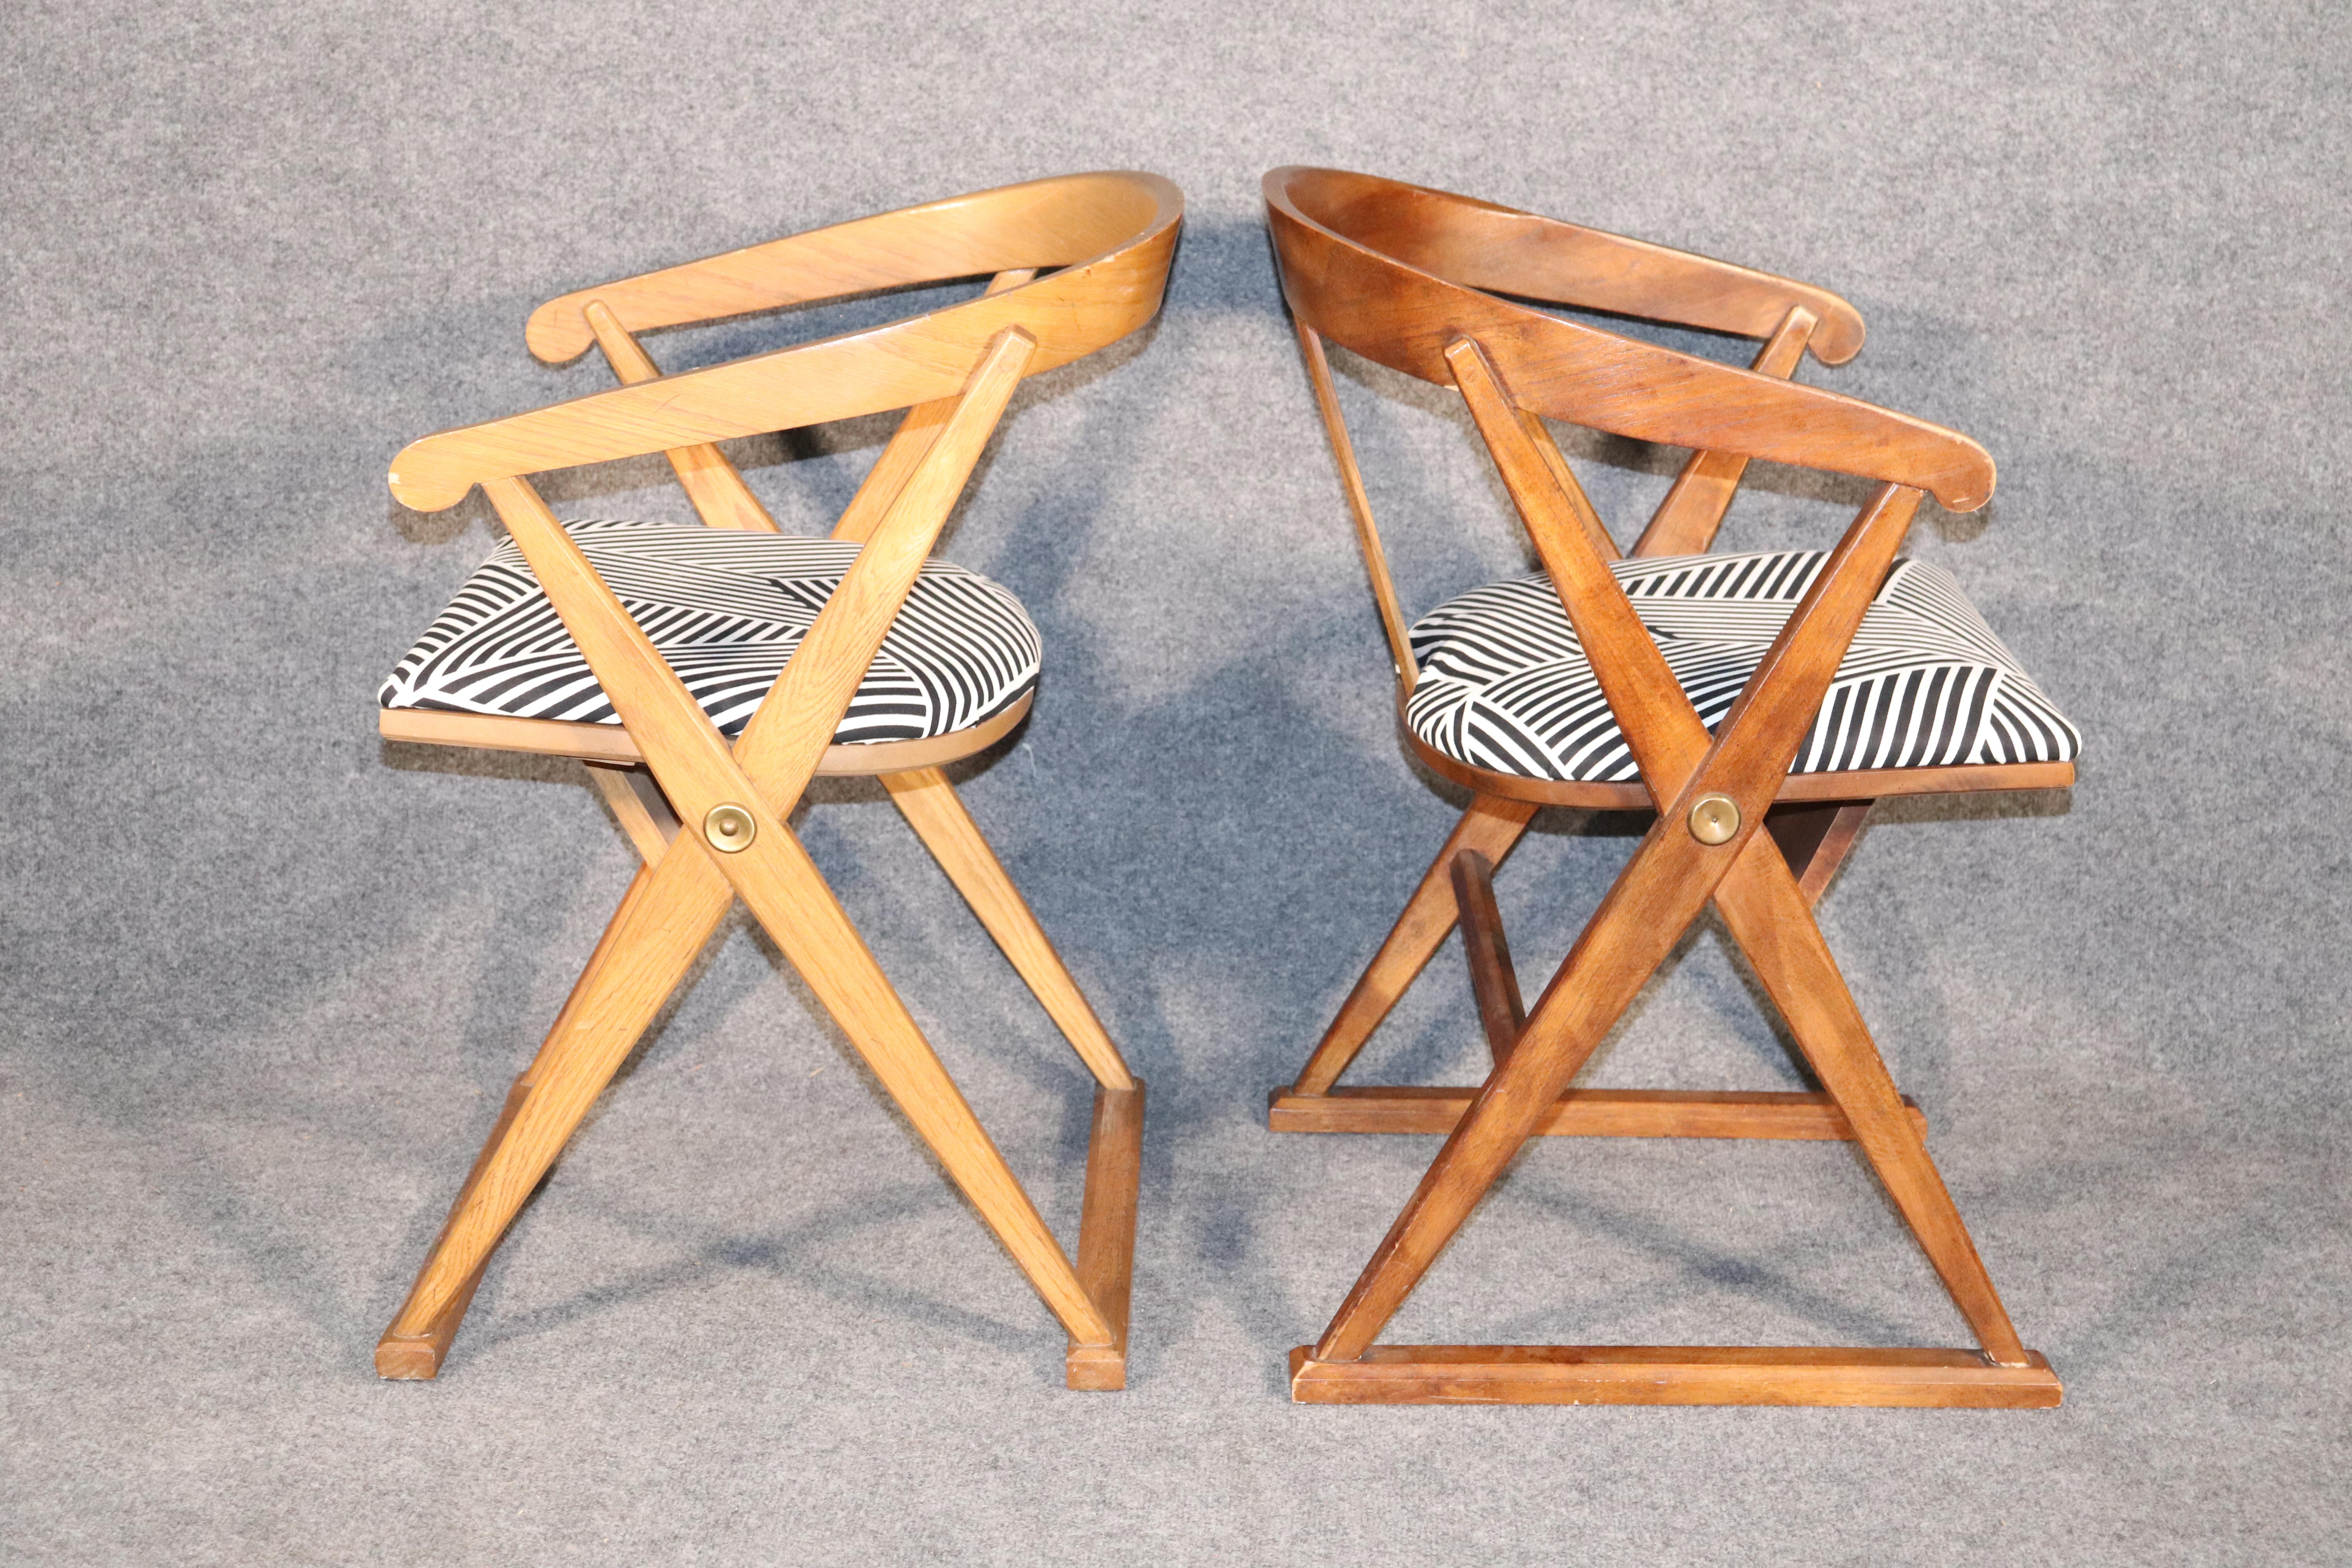 Unique arm chairs with bentwood back connecting to a criss cross frame.
Please confirm location.